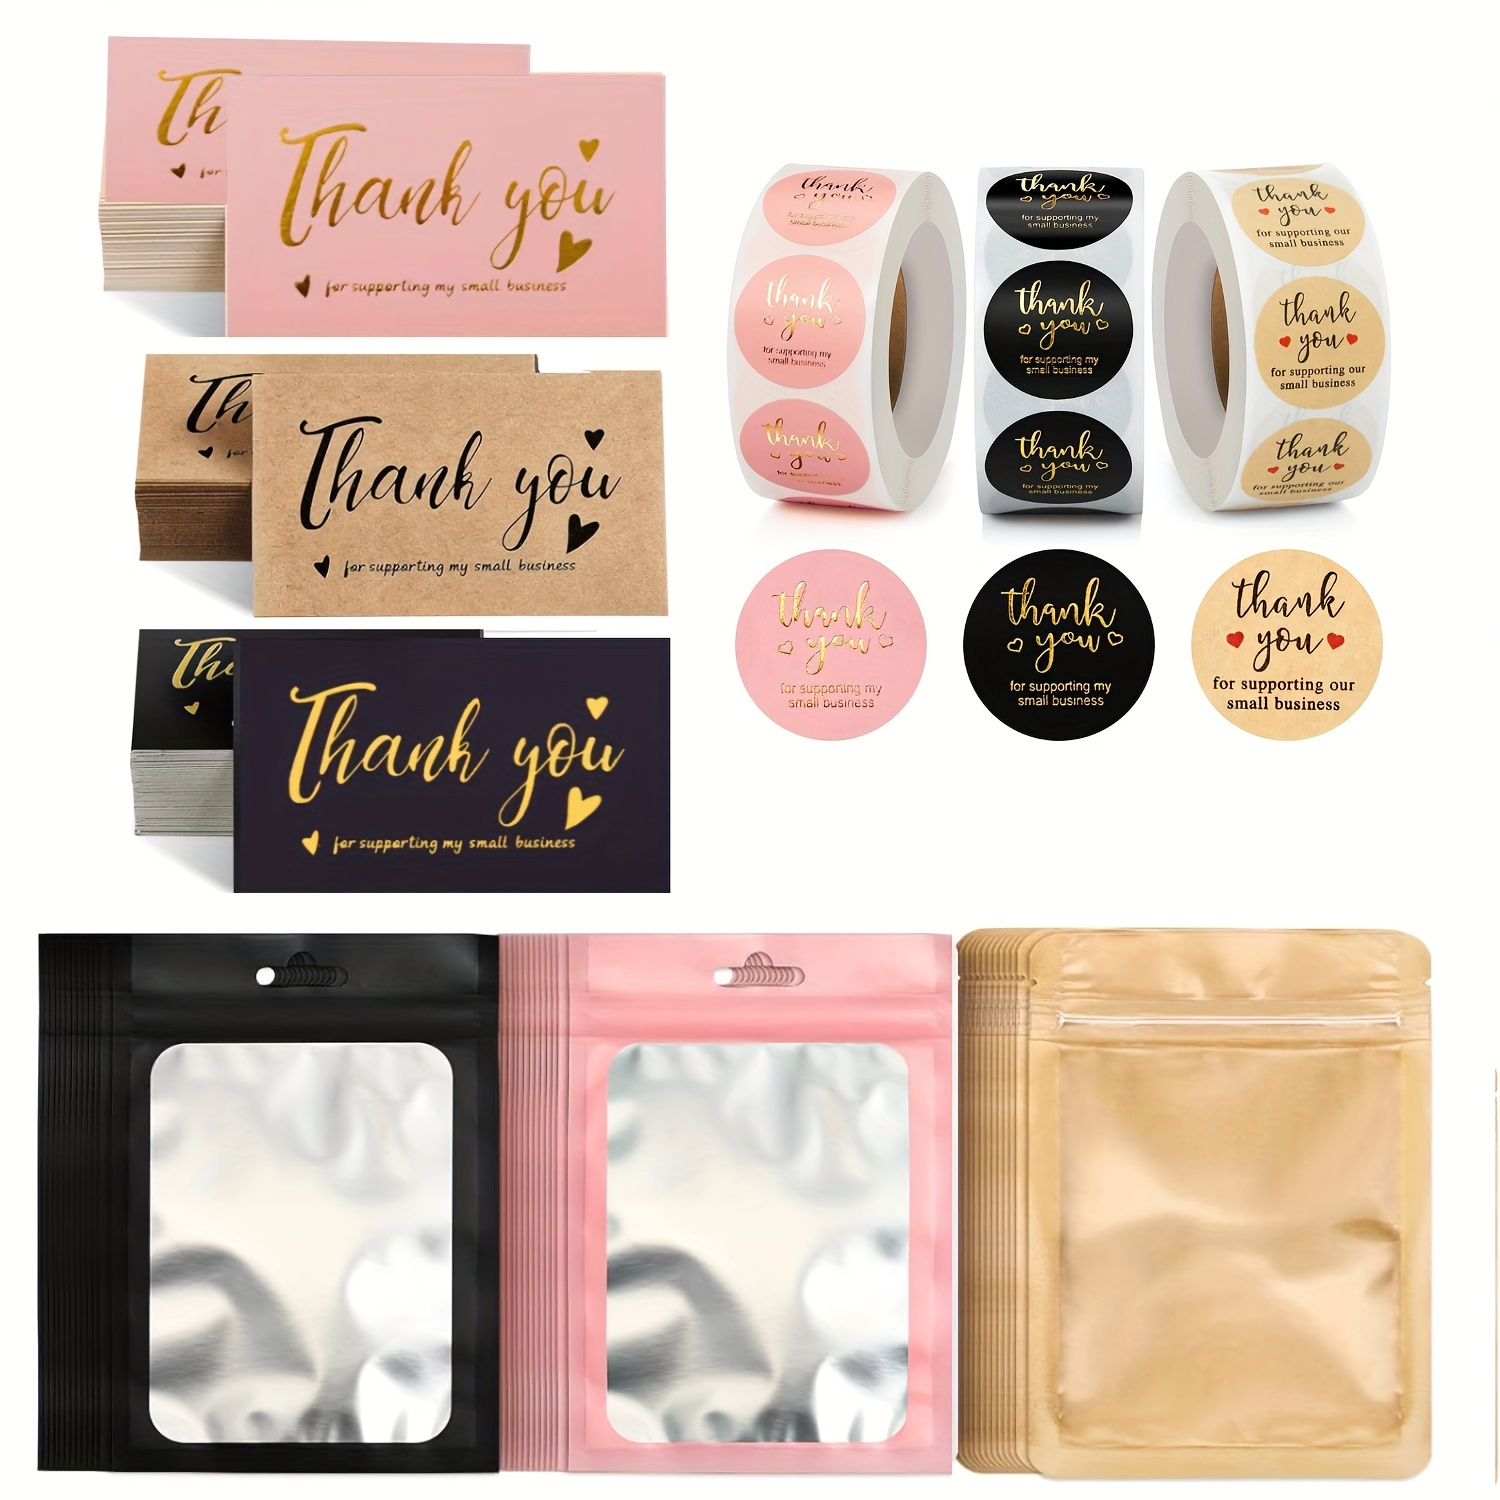 

1740-piece Thank You Card And Seal Bag Sticker Set - 1500 'thank You' Stickers, 150 Gold Foil Greeting Cards, 90 Reusable Thick Seal Bags - Multi-occasion Appreciation For Any Recipient